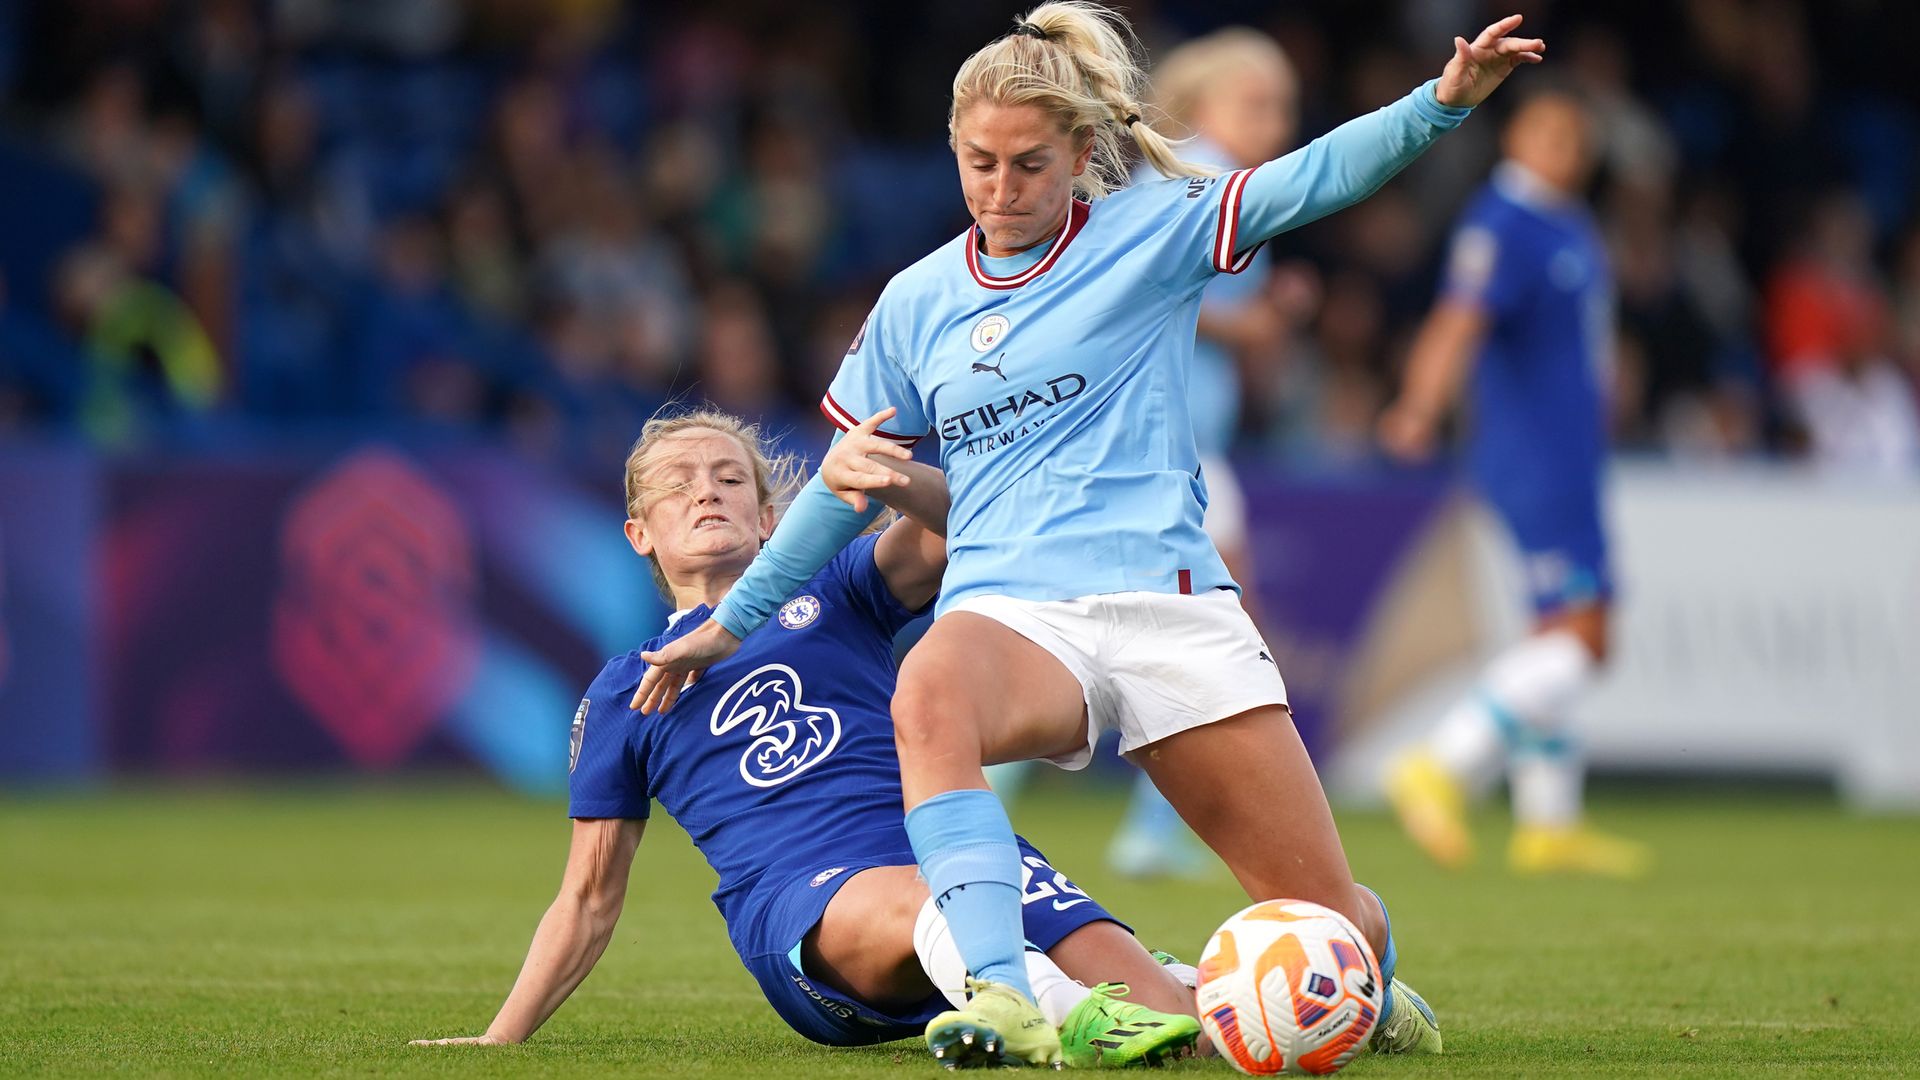 Man City Women stop wearing white shorts due to period concerns